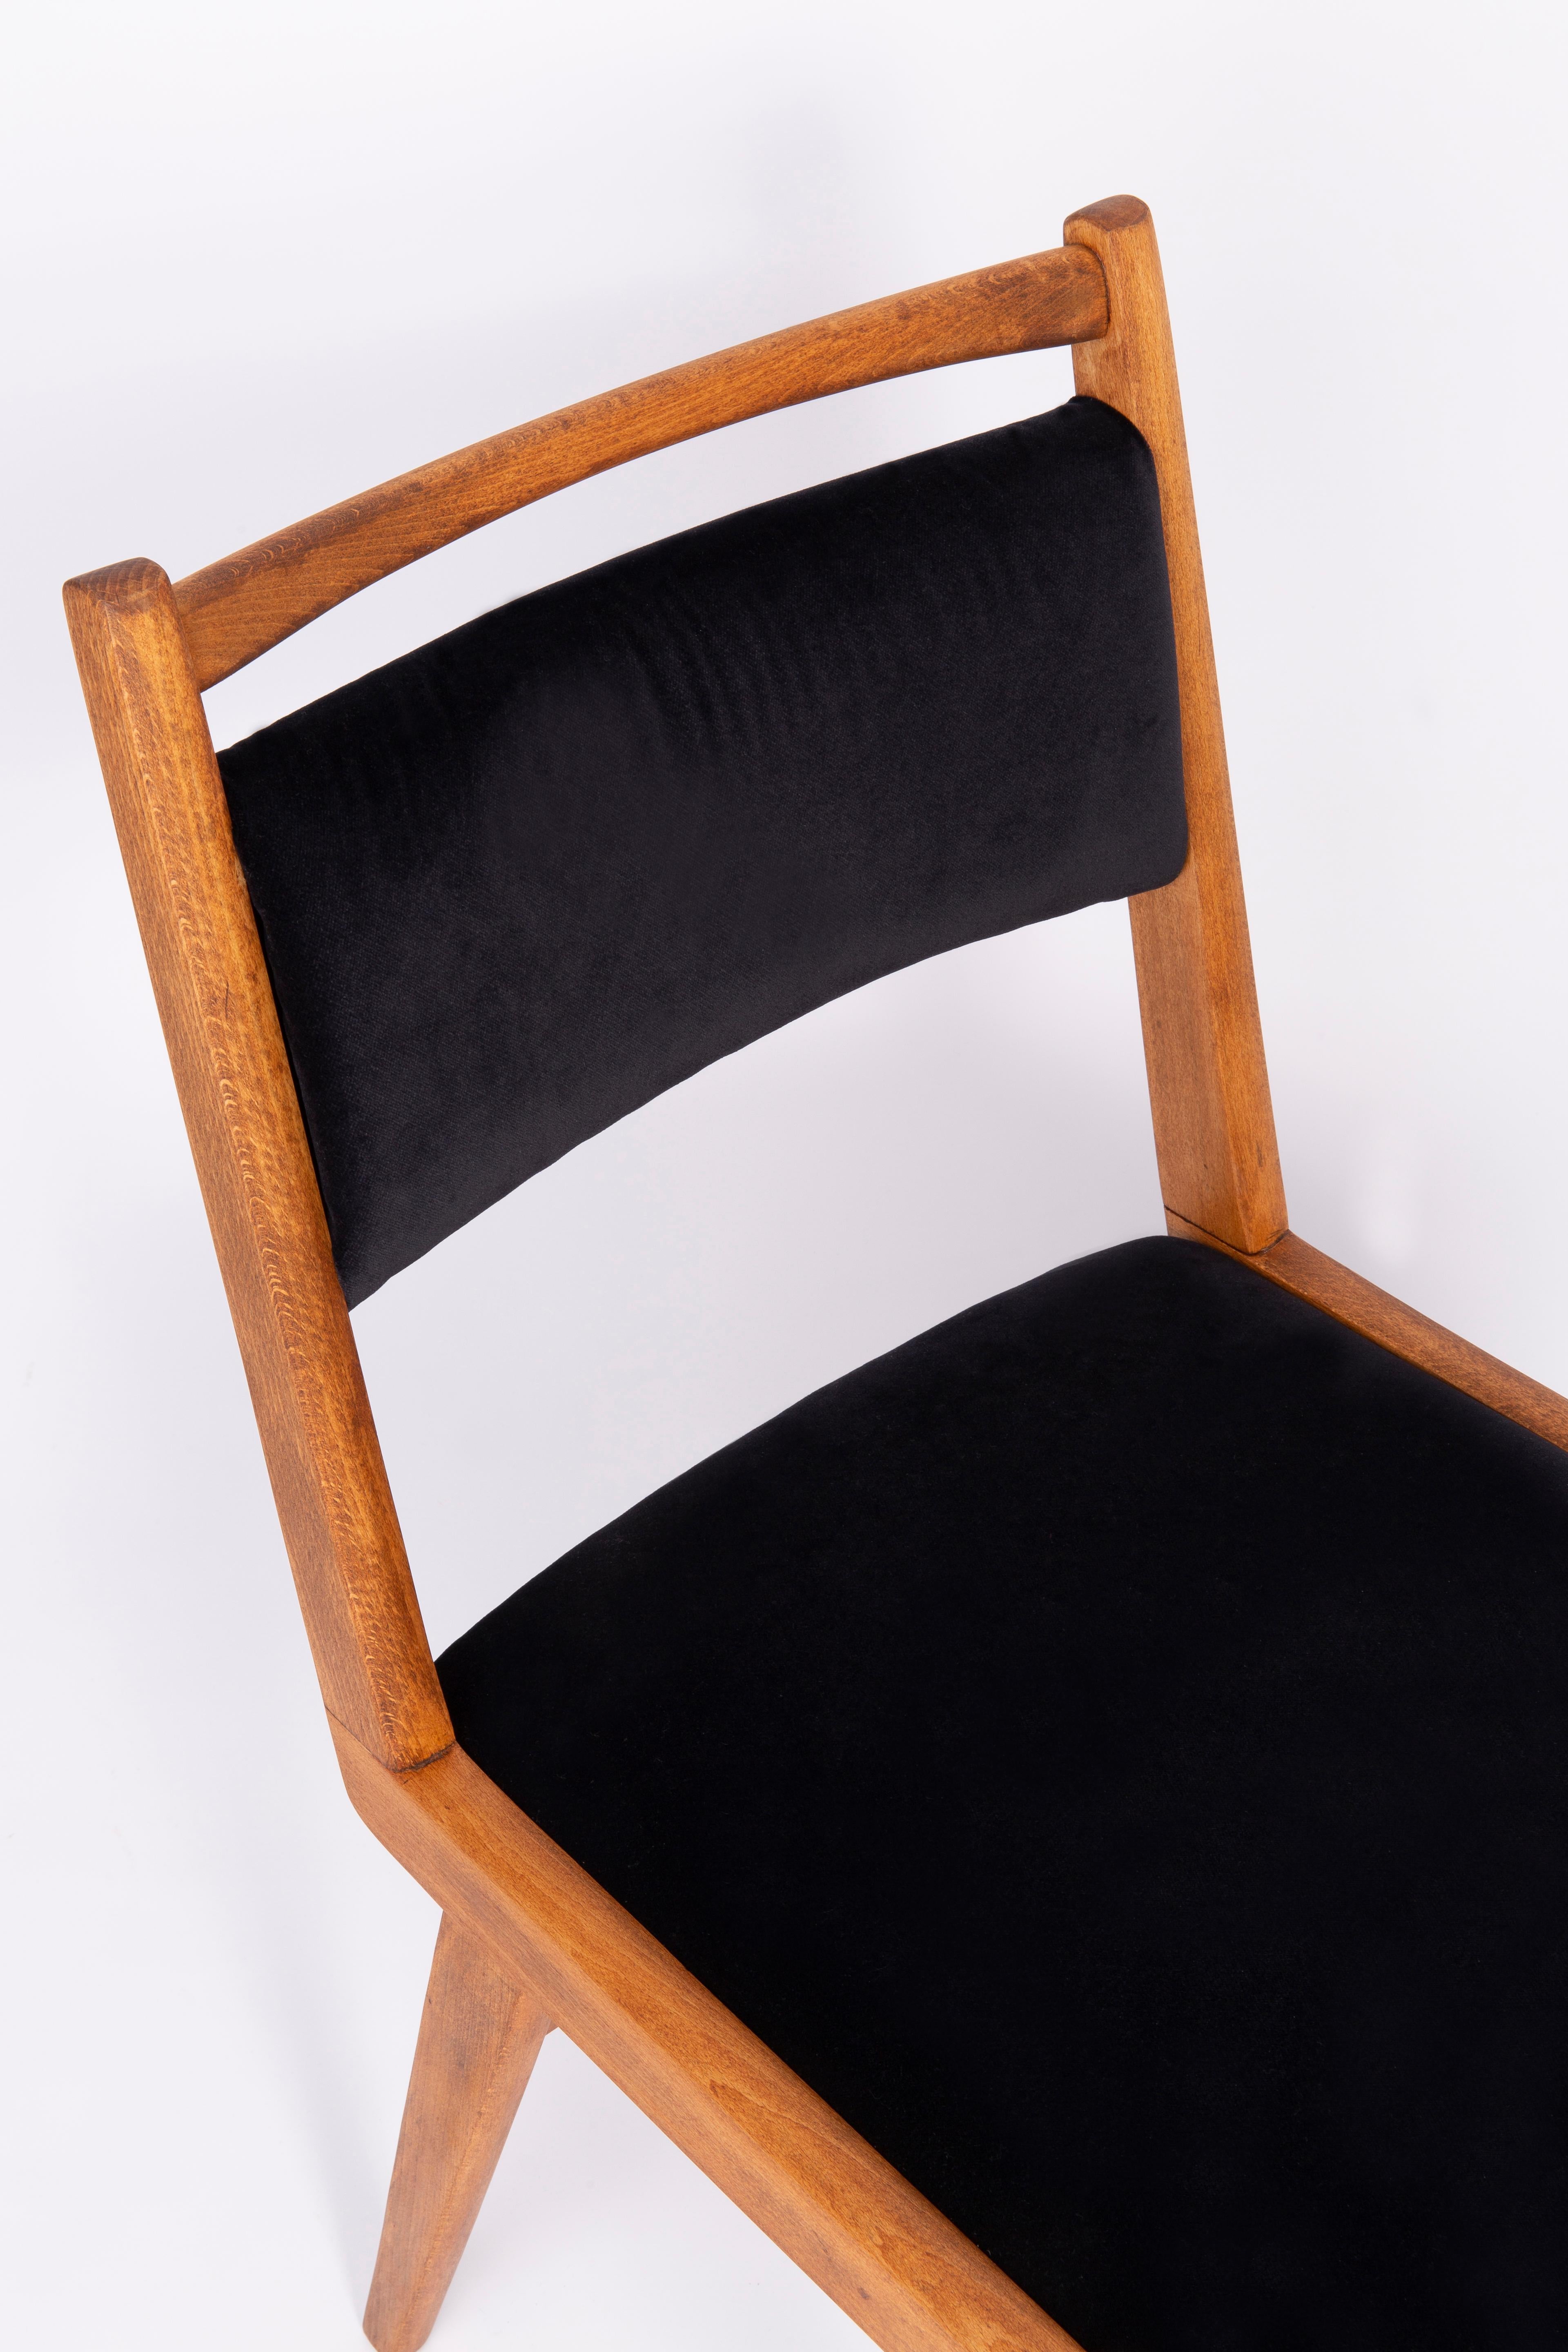 Chairs designed by Prof. Rajmund Halas. It is JAR type model. Made of beechwood. Chairs are after a complete upholstery renovation, the woodwork has been refreshed. Seat and back is dressed in a black and blue, durable and pleasant to the touch